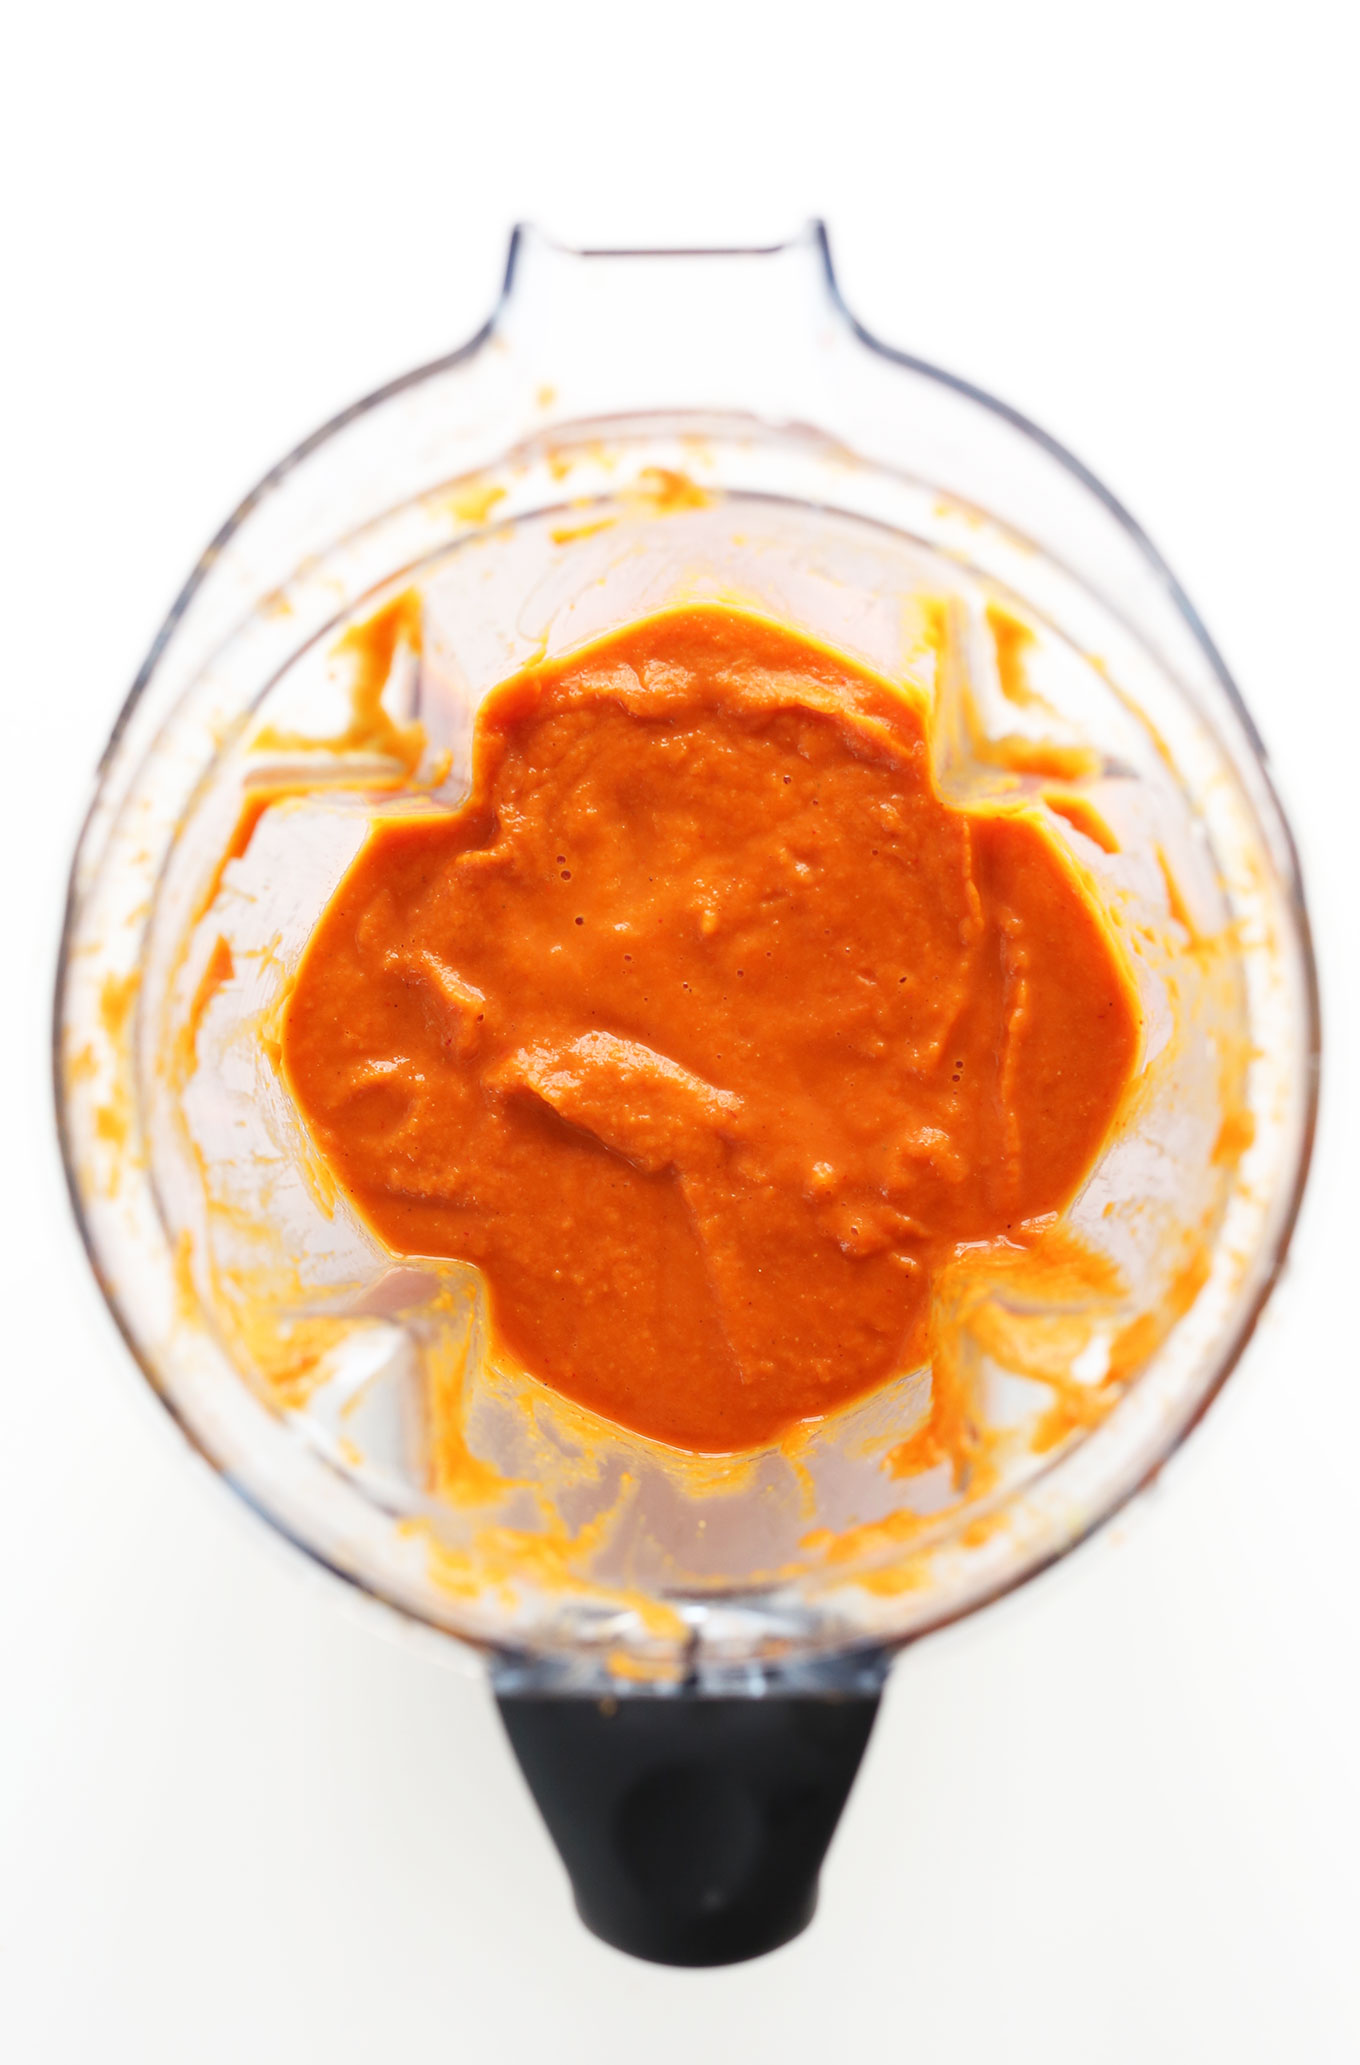 Blender filled with our homemade Red Salsa with Chipotle Peppers